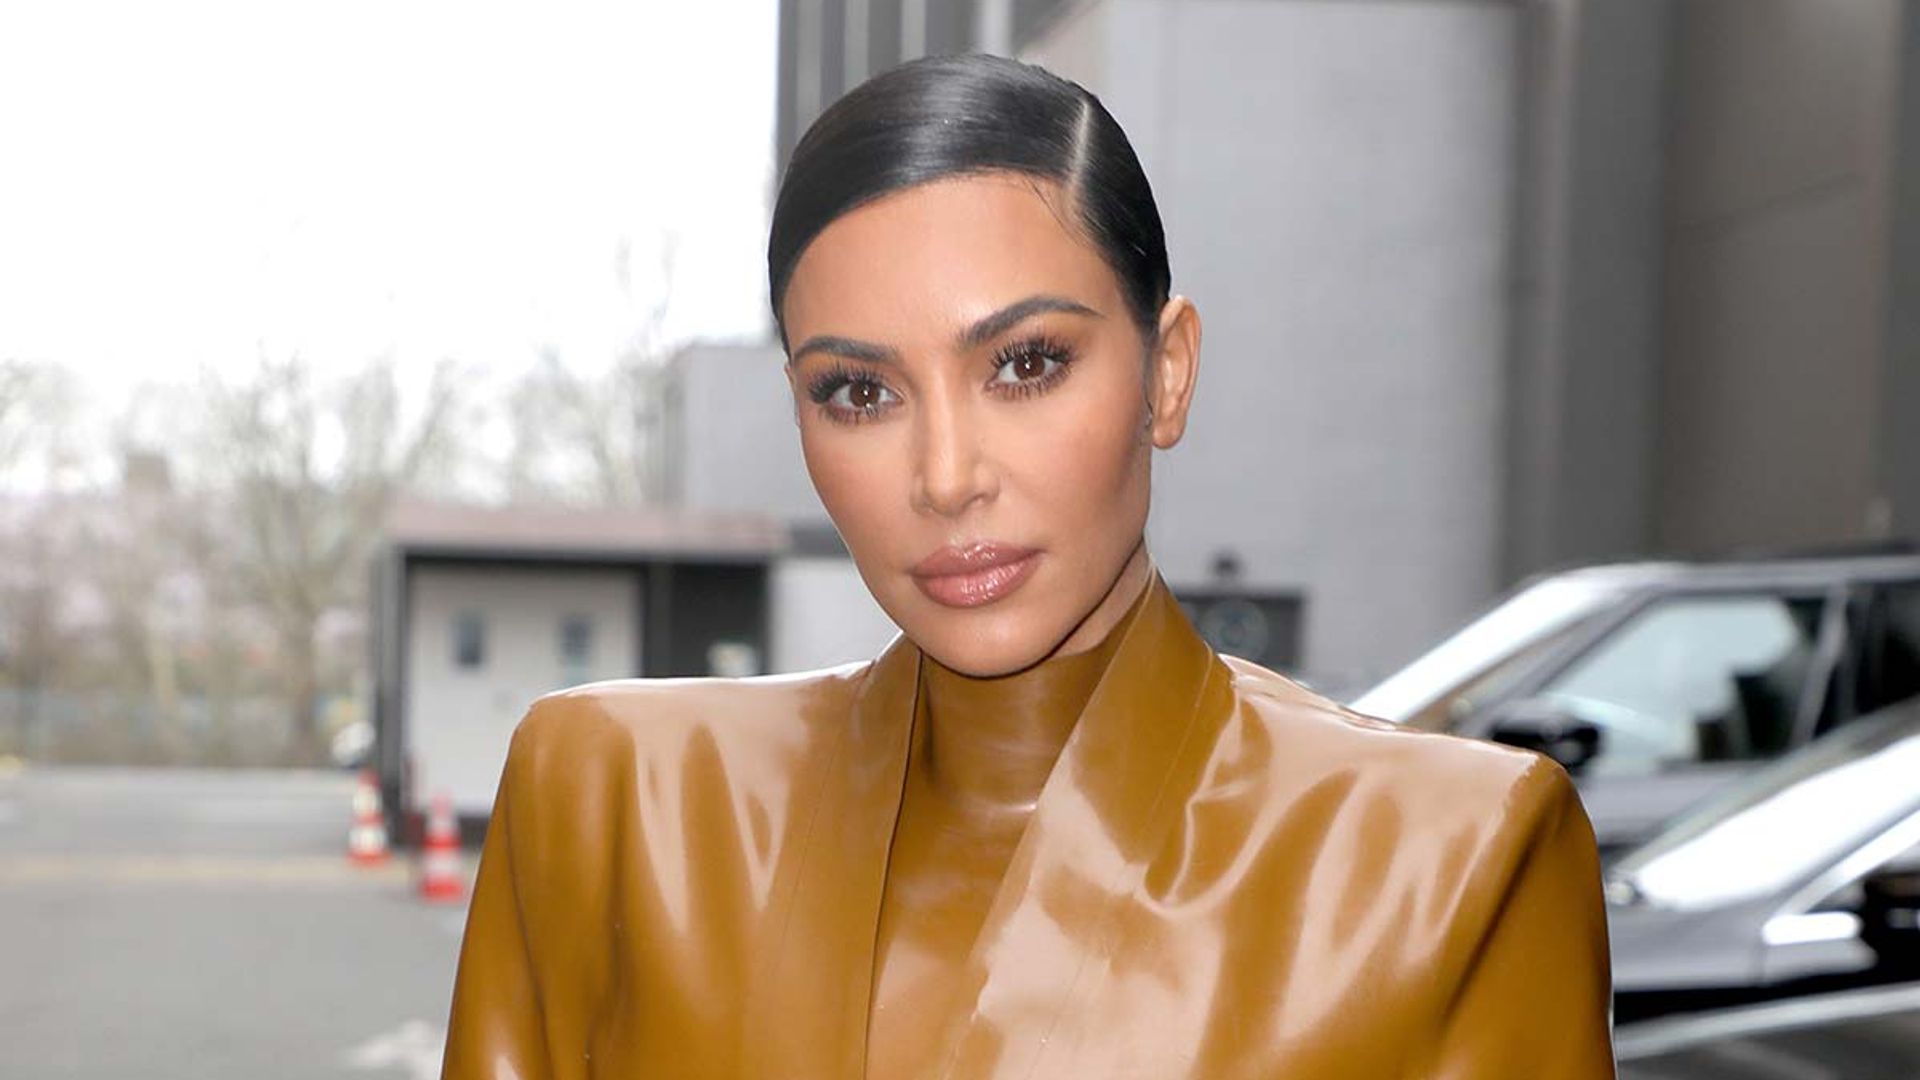 Kim Kardashian dishes on her new skincare brand, channelling a